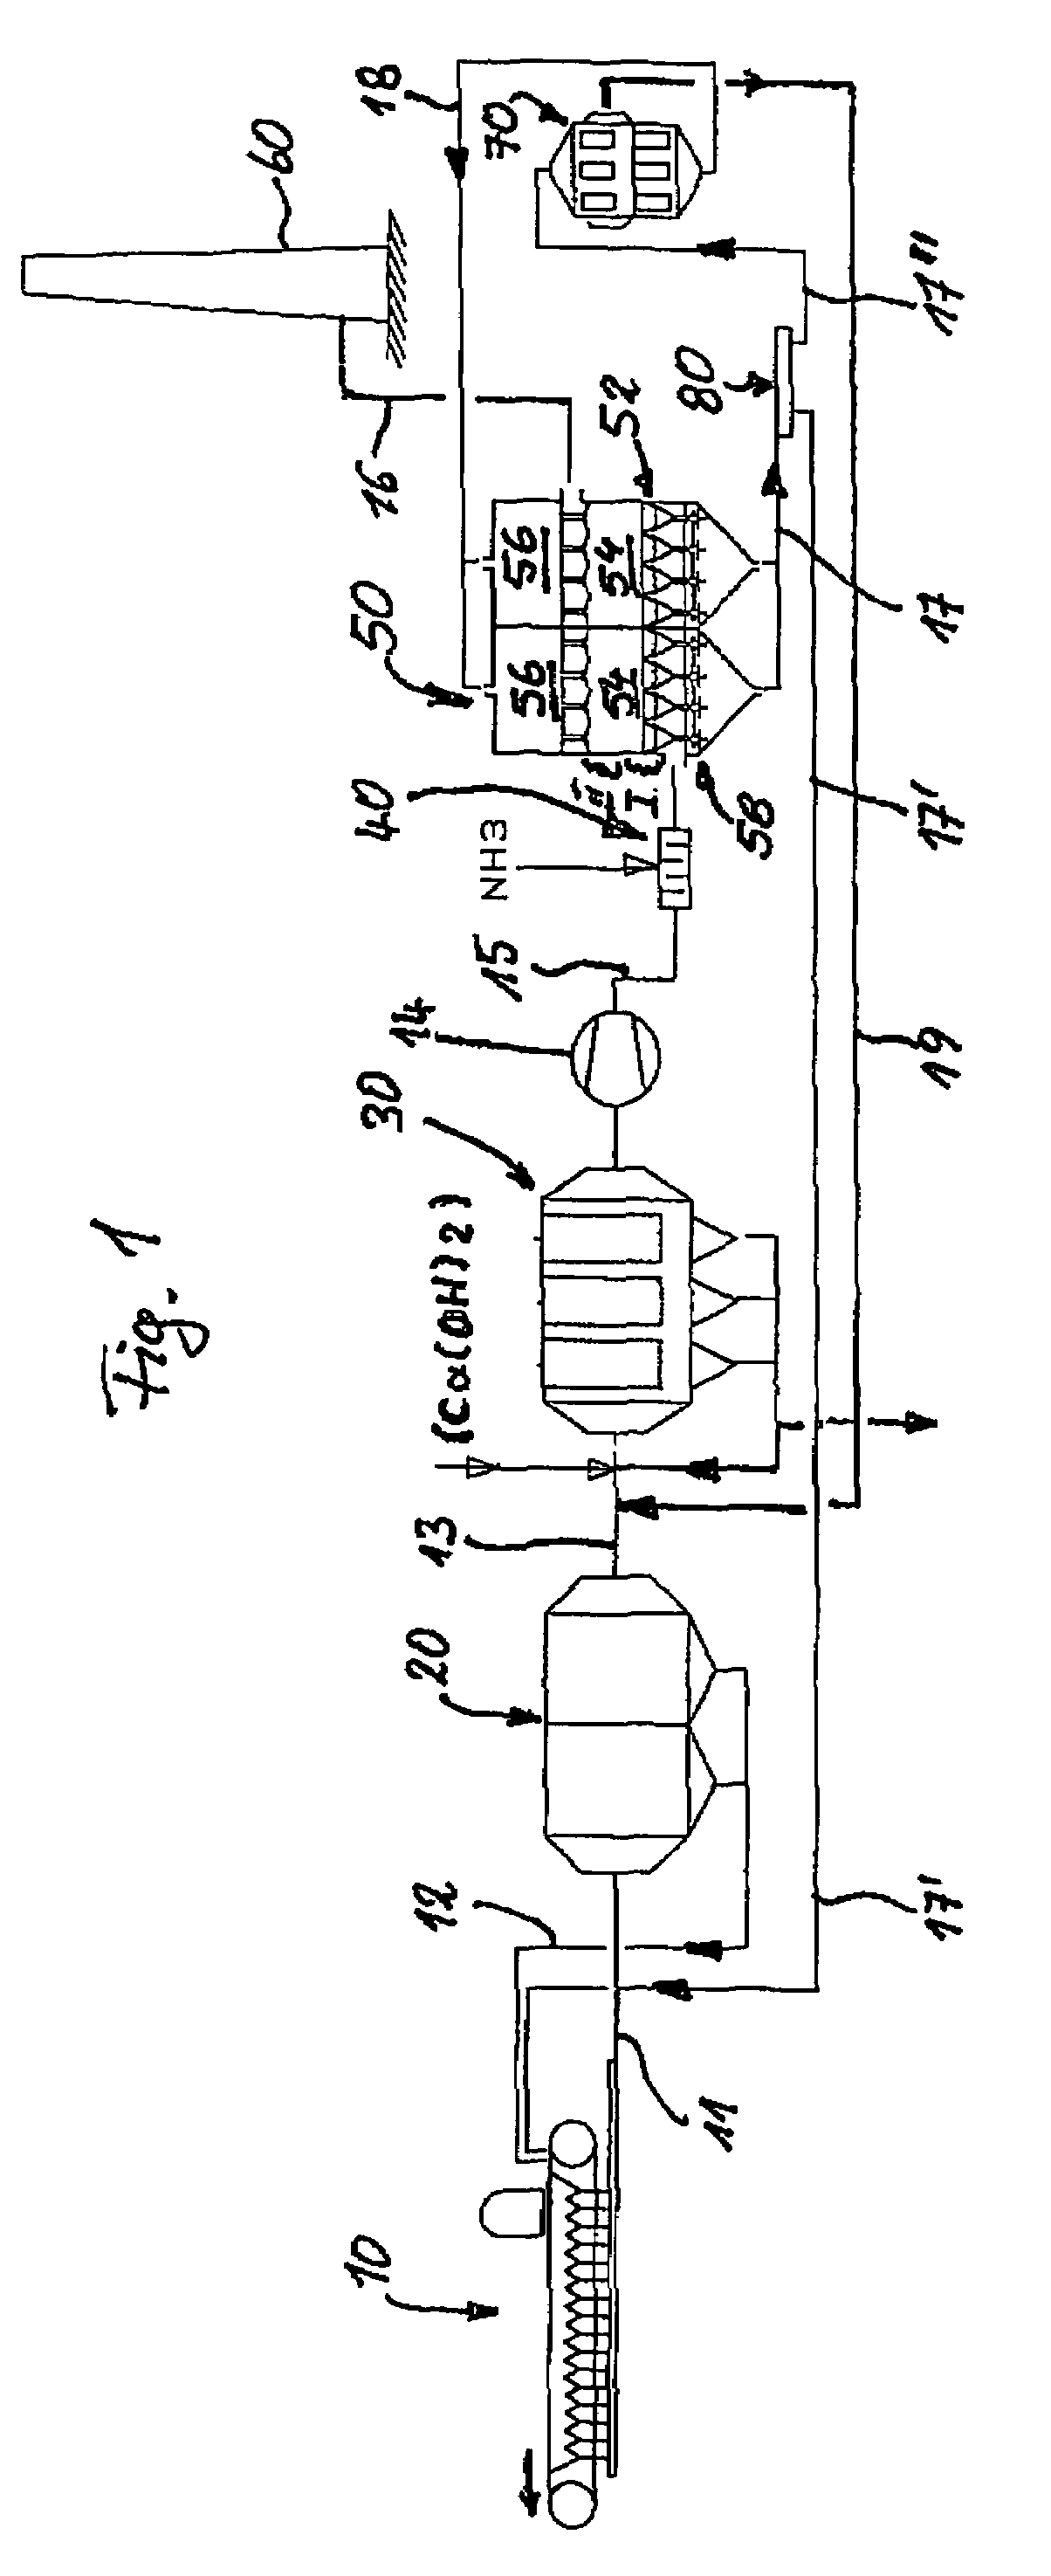 Method for cleaning exhaust gases produced by a sintering process for ores and/or other metal-containing materials in metal production